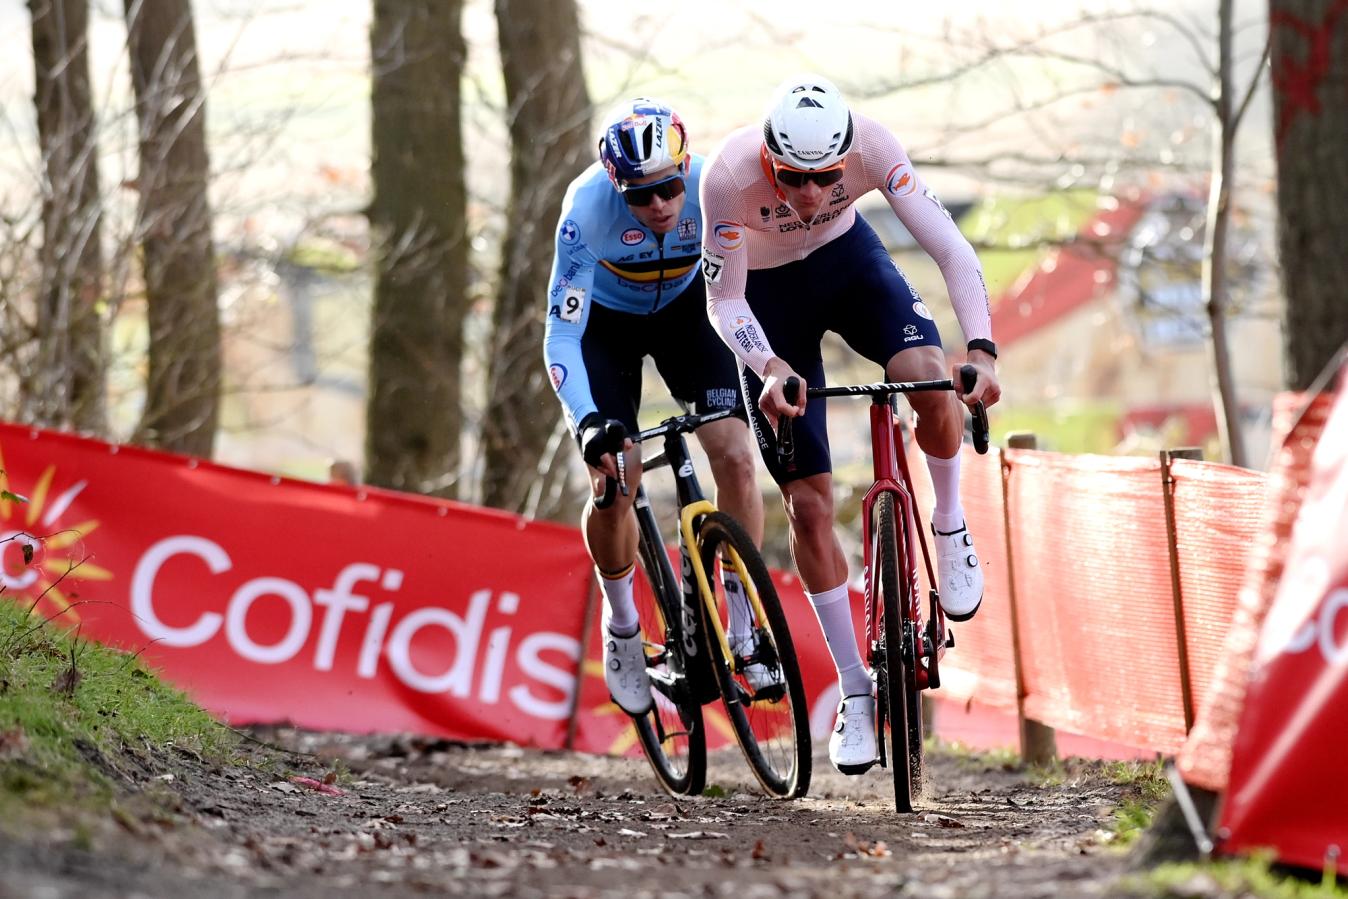 Those hoping for a true encounter between Mathieu van der Poel and Wout Van Aert may have been disappointed to see Van Aert so far off the pace in Mo;